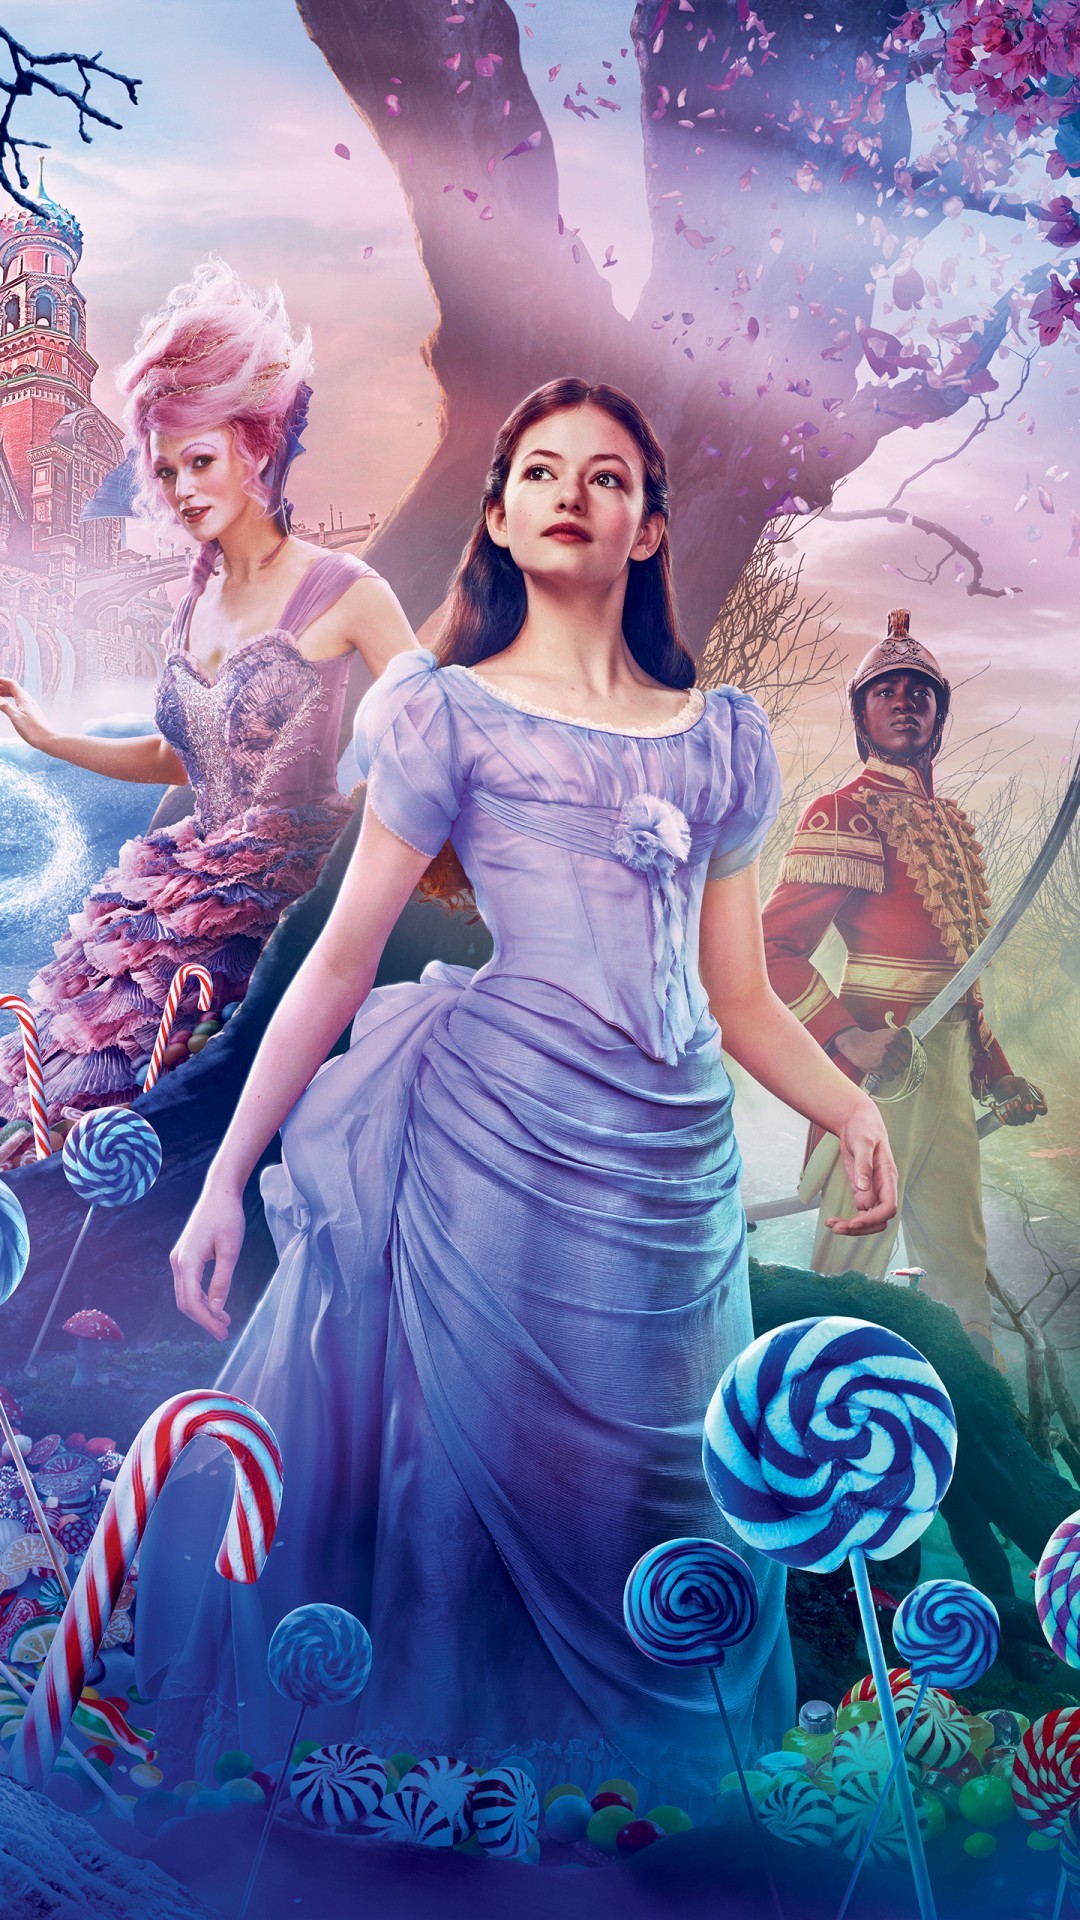 Free The Nutcracker the Four Realms phone wallpaper by